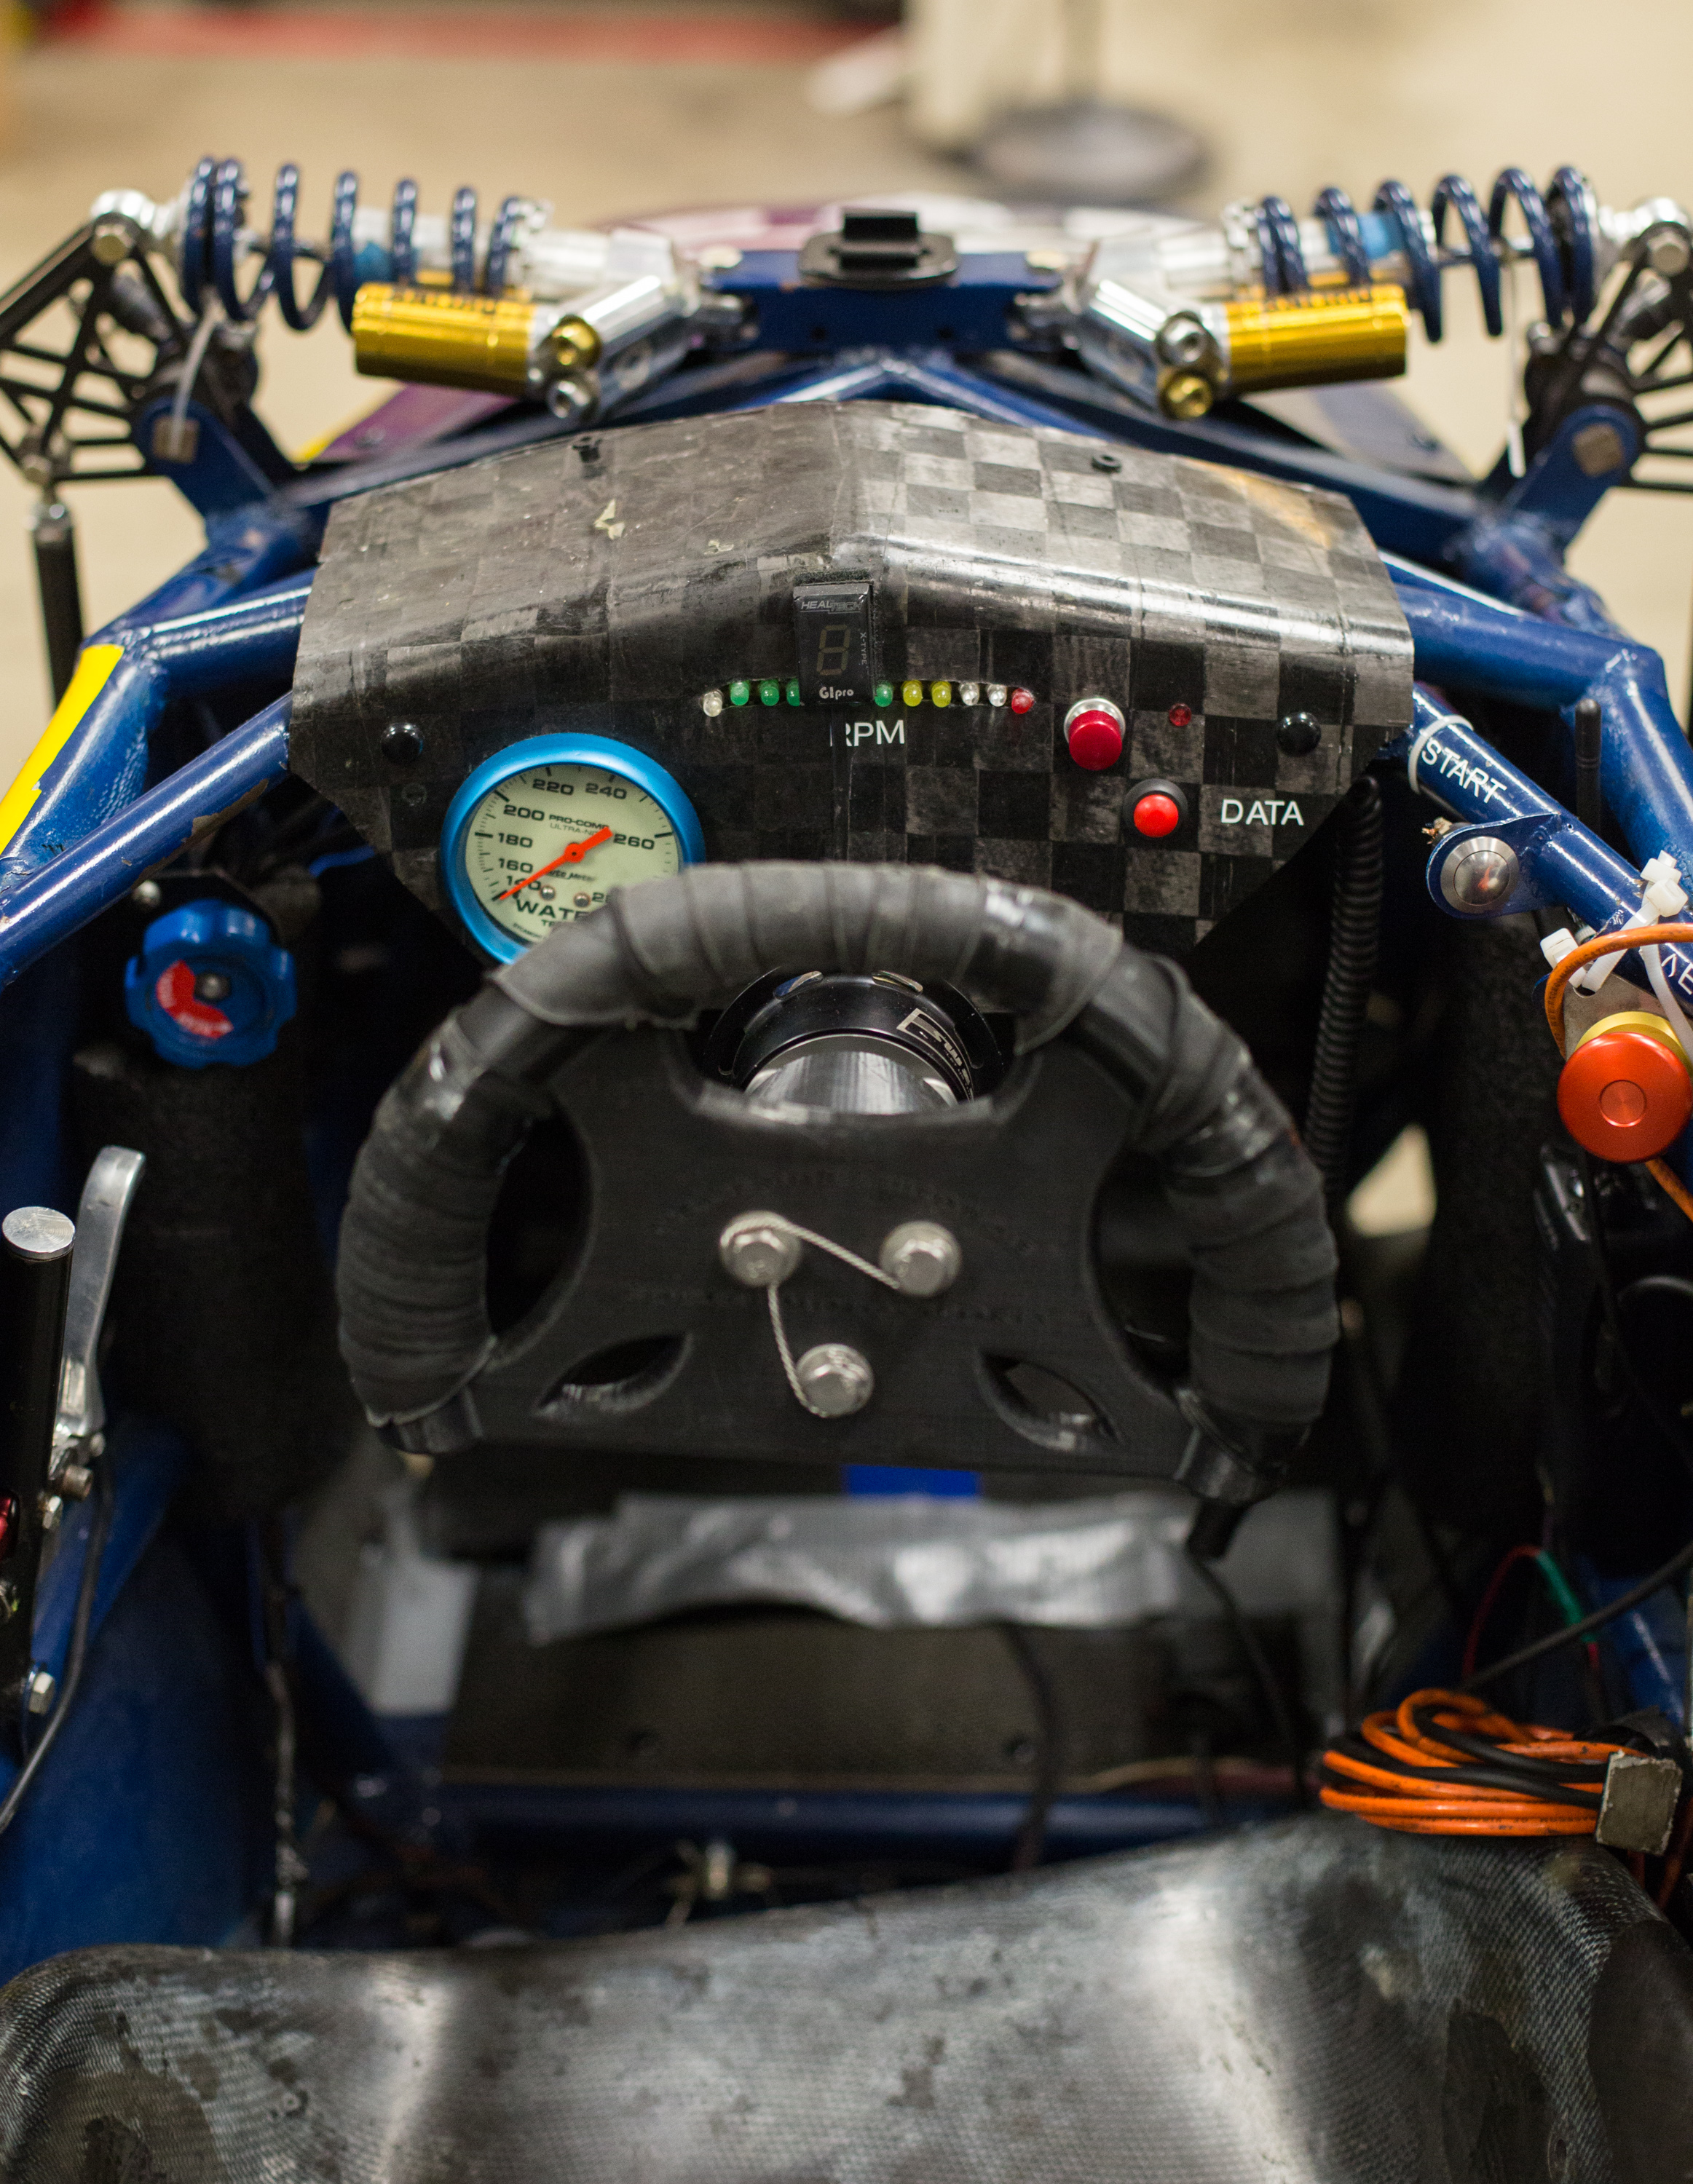  The view of the cockpit of the previous season's car. The team keeps the car in the lab and uses it to study and improve the design for the next car. 